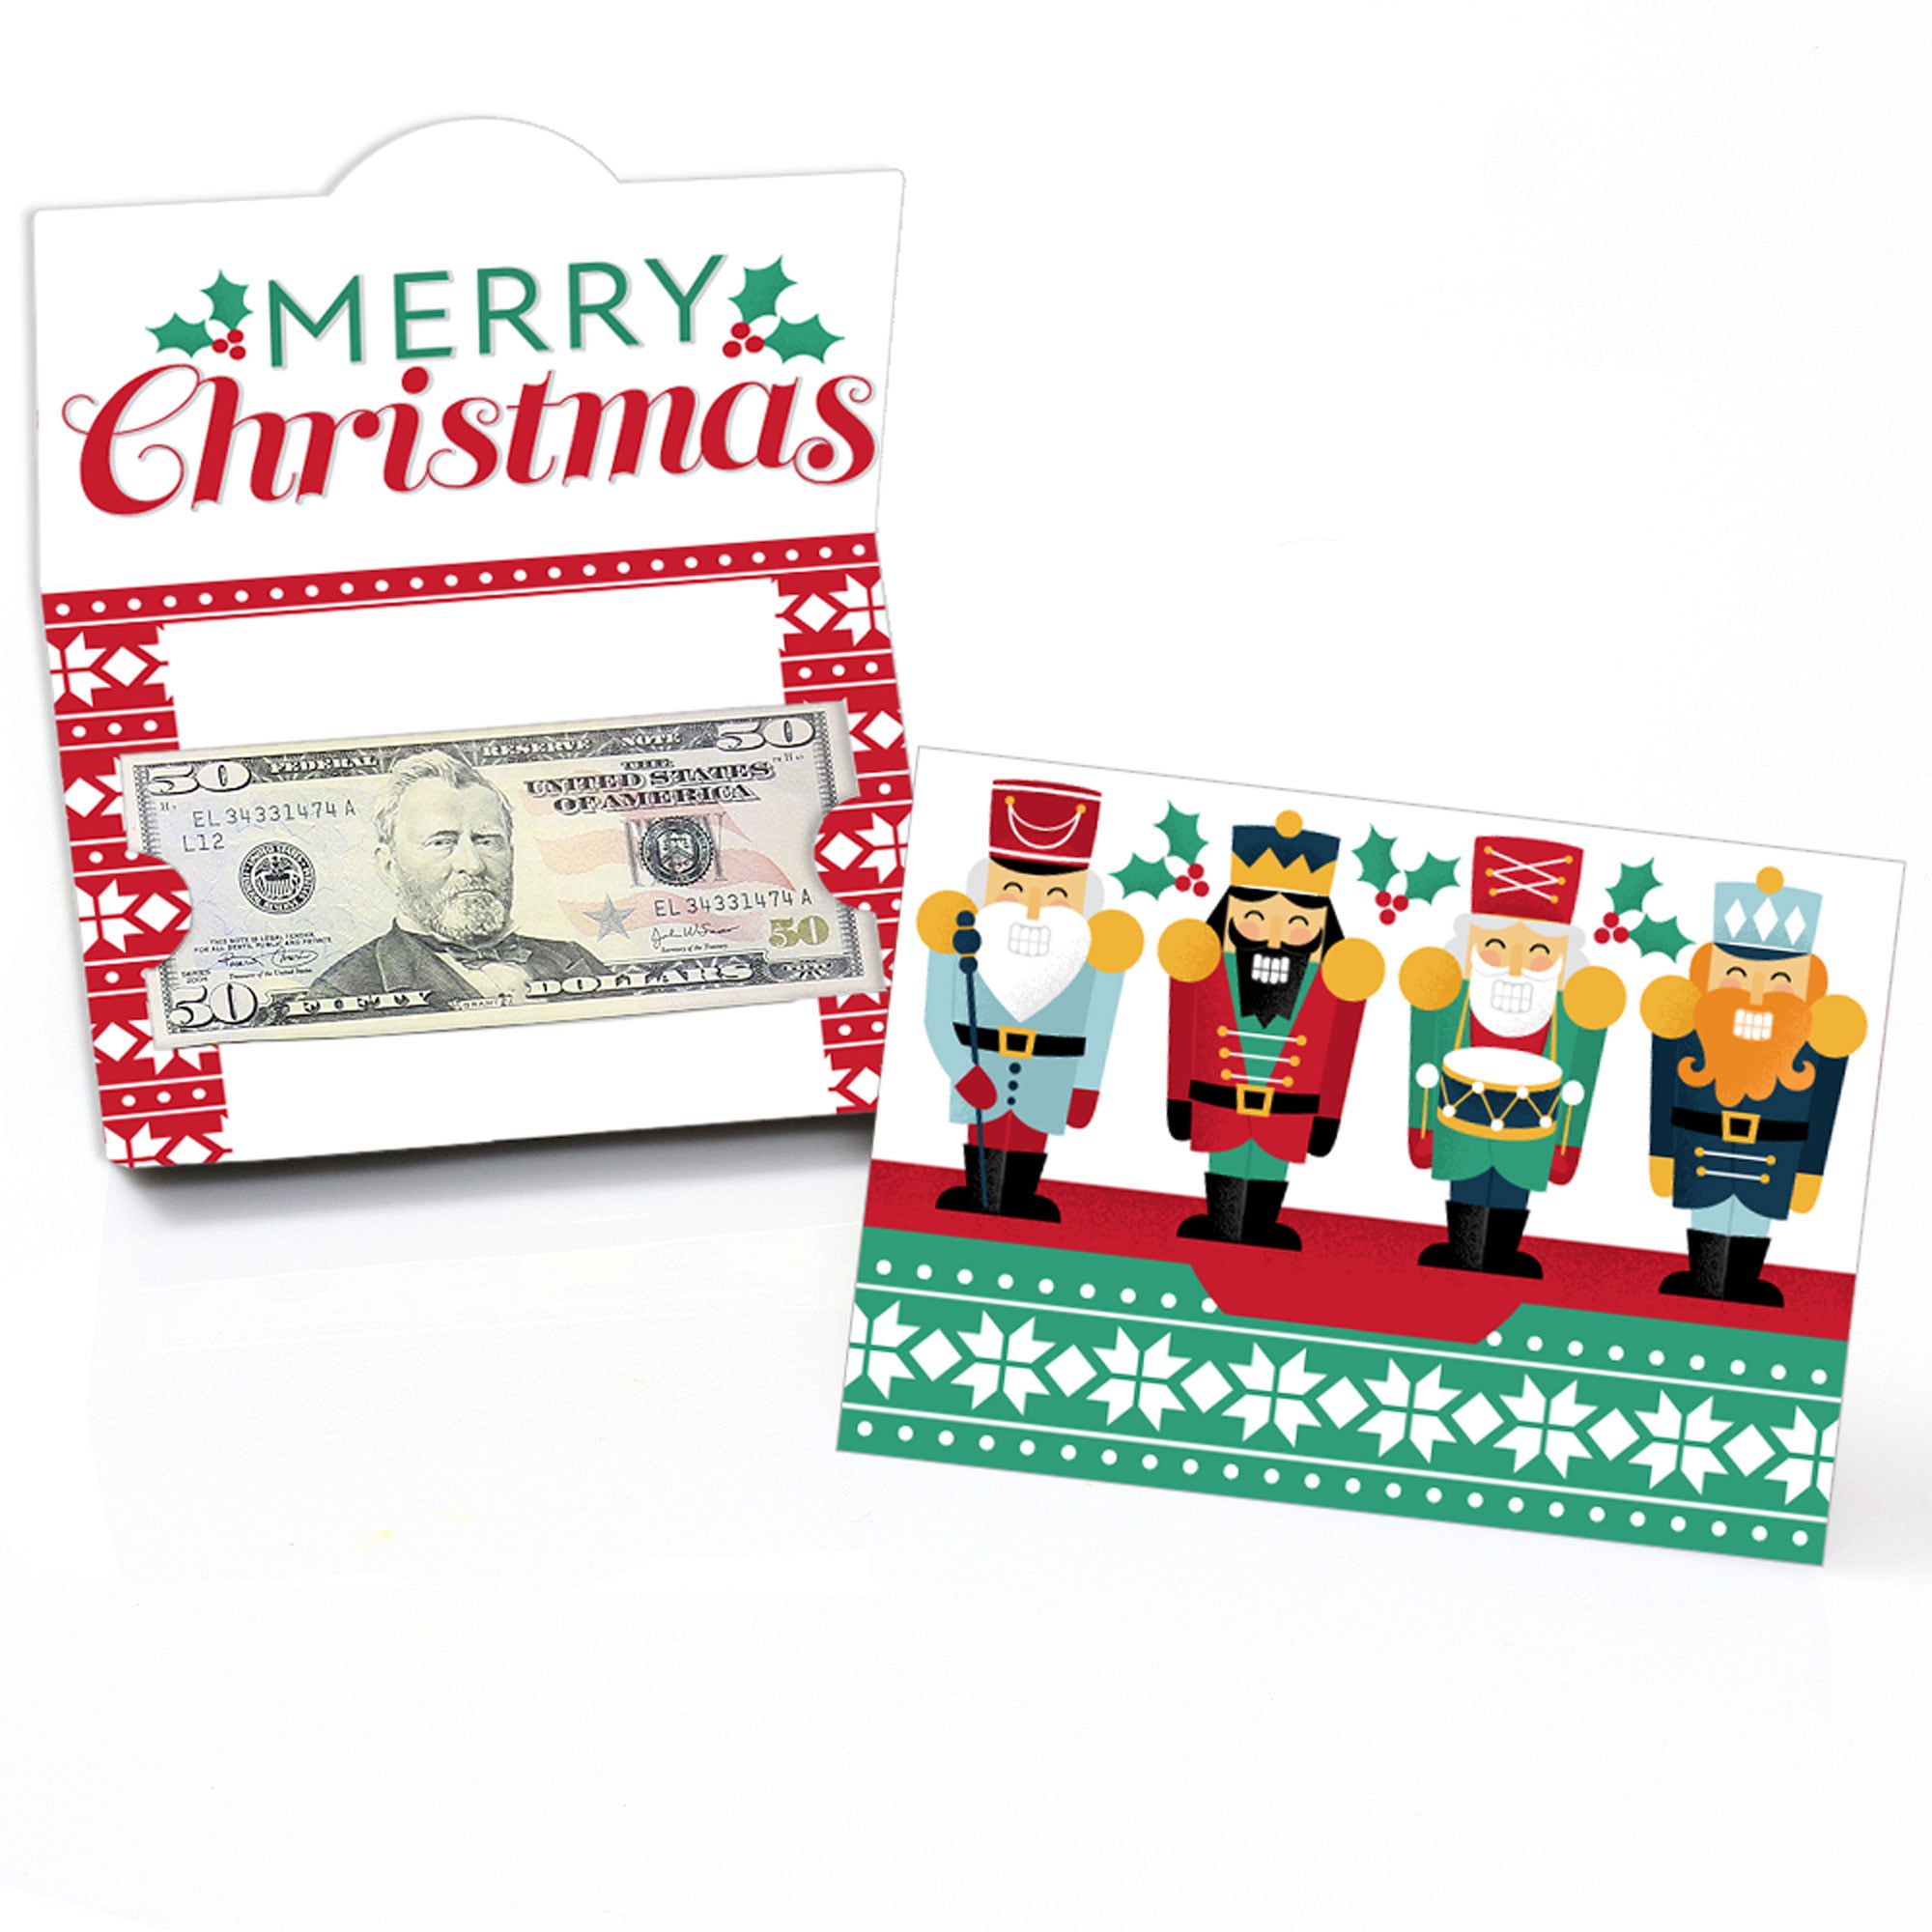 1 HOLIDAY/CHRISTMAS* Pack MONEY/GIFT CARD HOLDER w/Envelopes *YOU CHOOSE* New! 